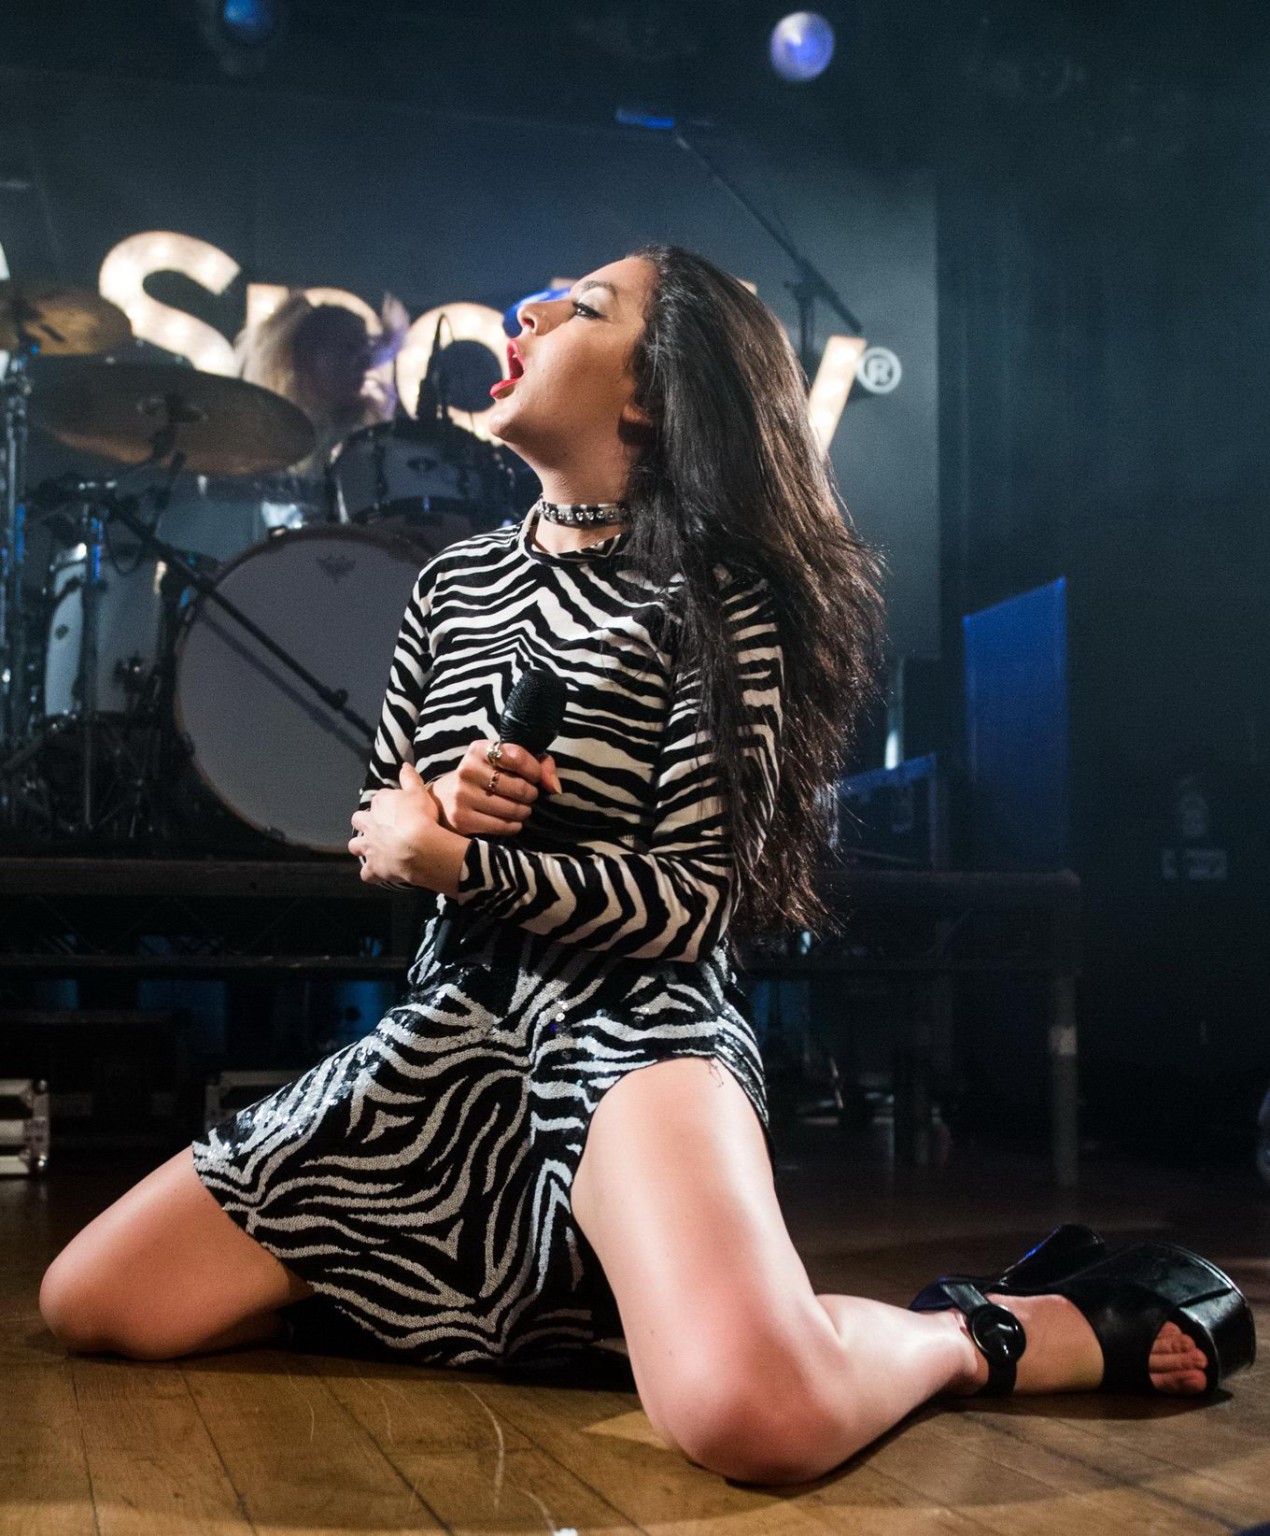 Charli XCX upskirt at the Spotify Opening Gig in London #75169053